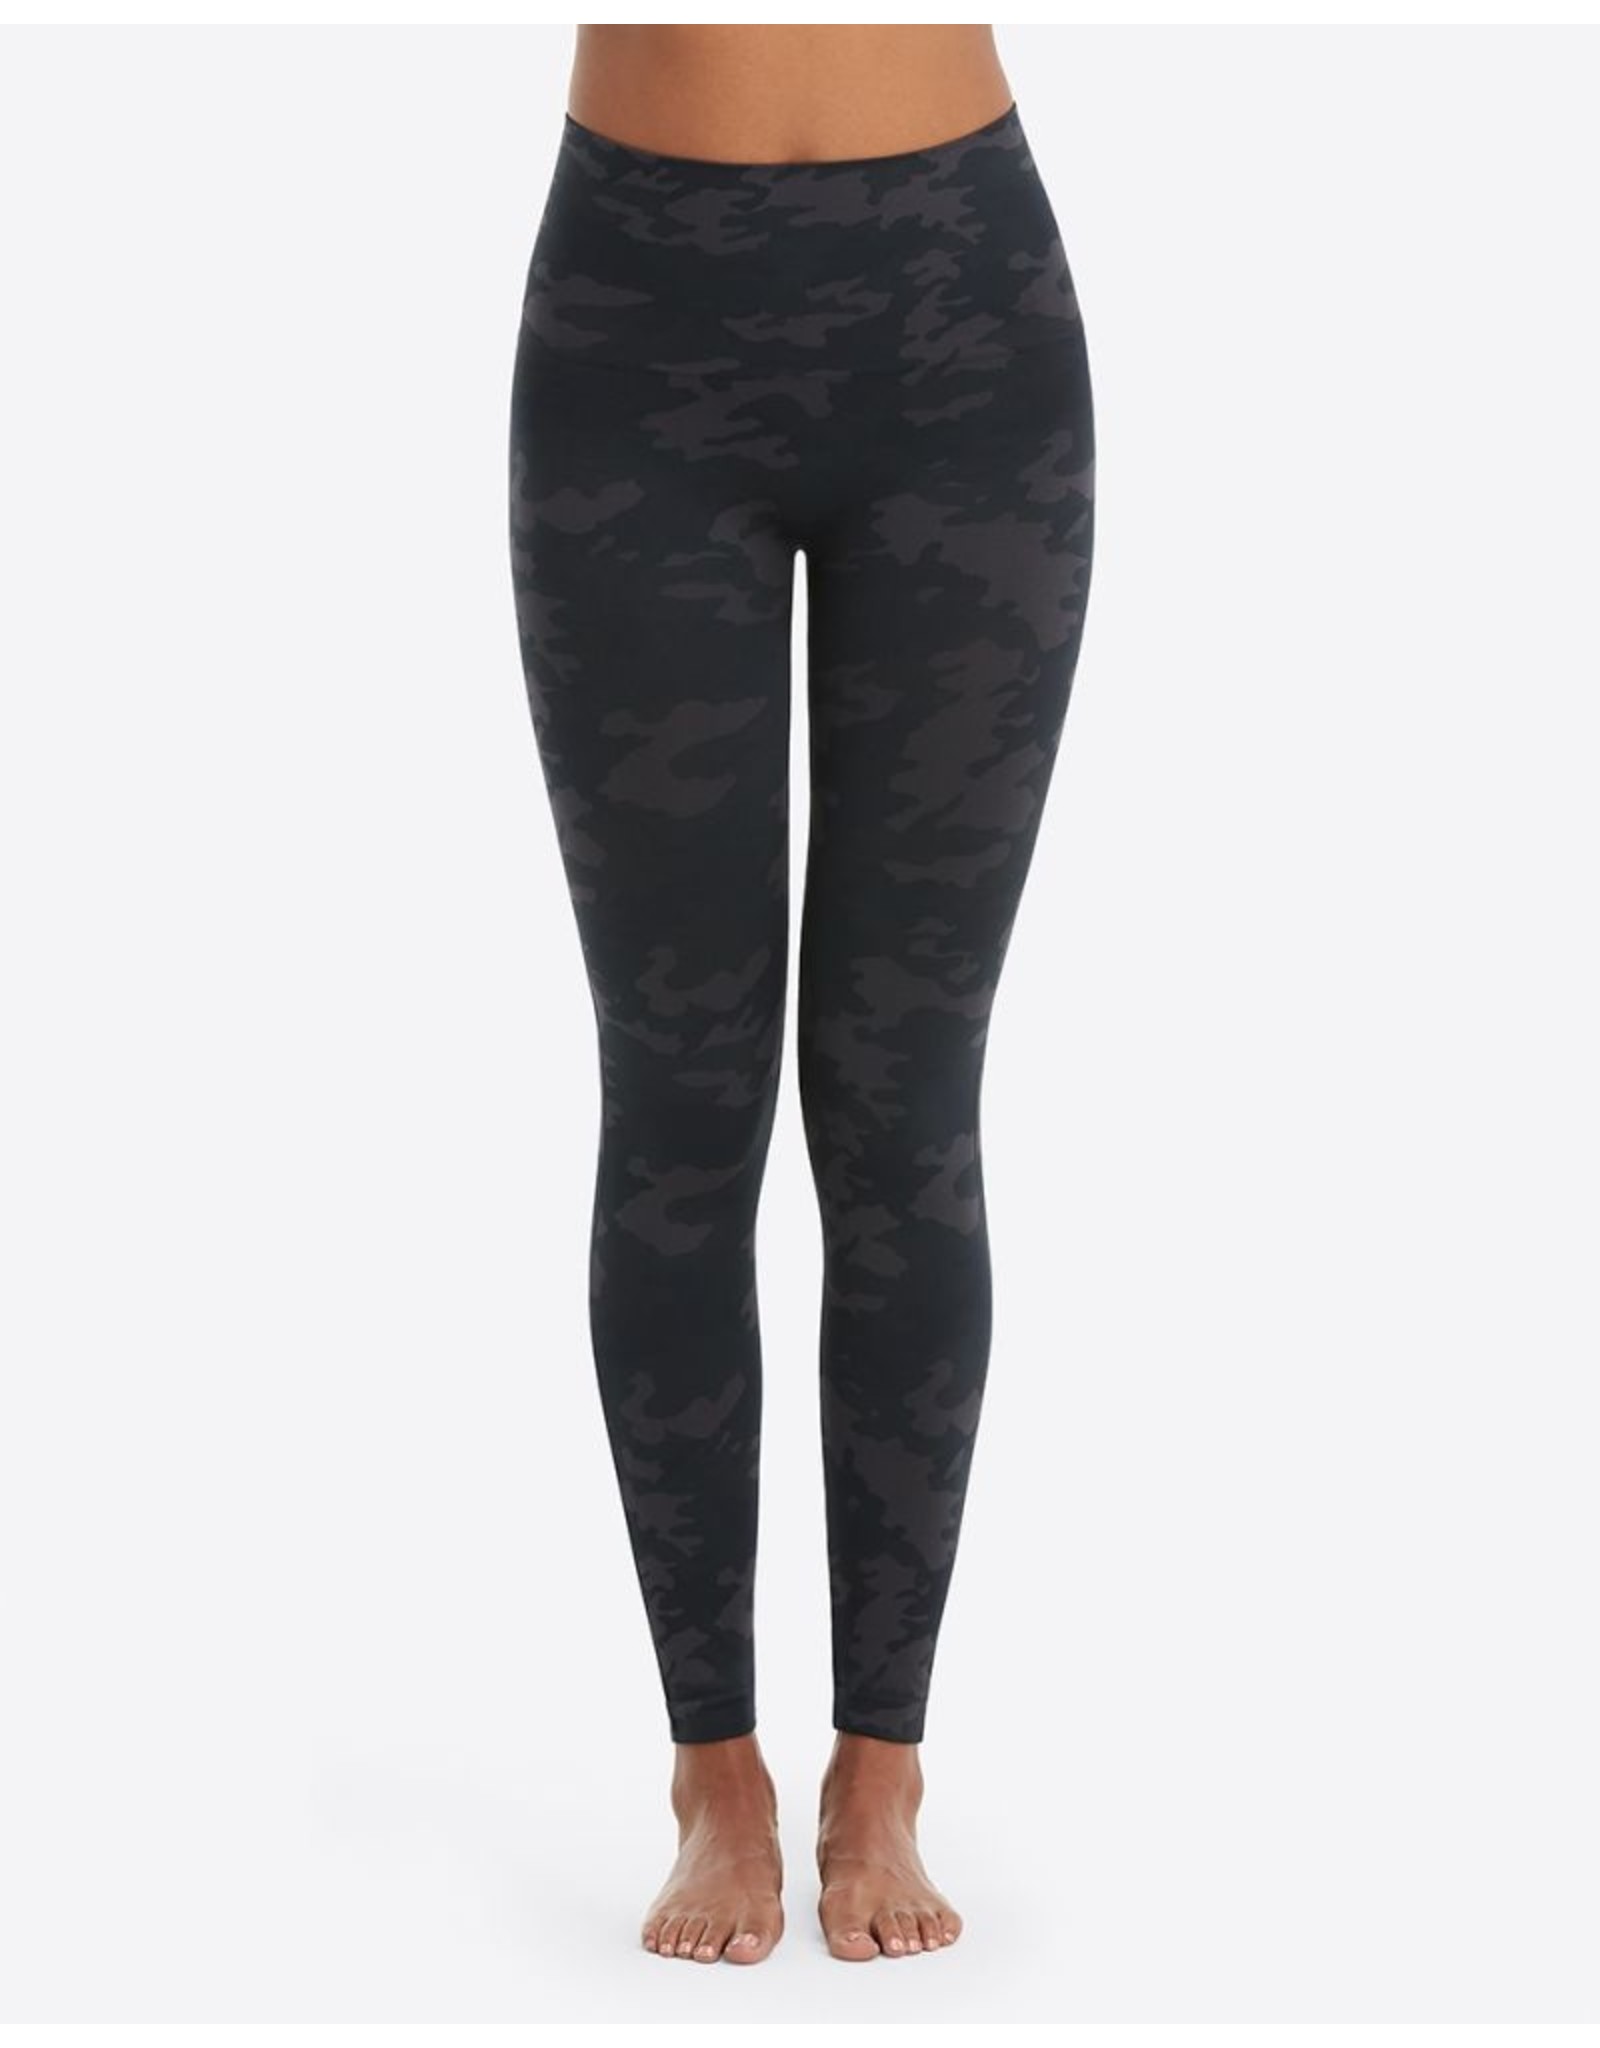 NWT $68 SPANX [ XL ] Look at Me Now Seamless Leggings in Black